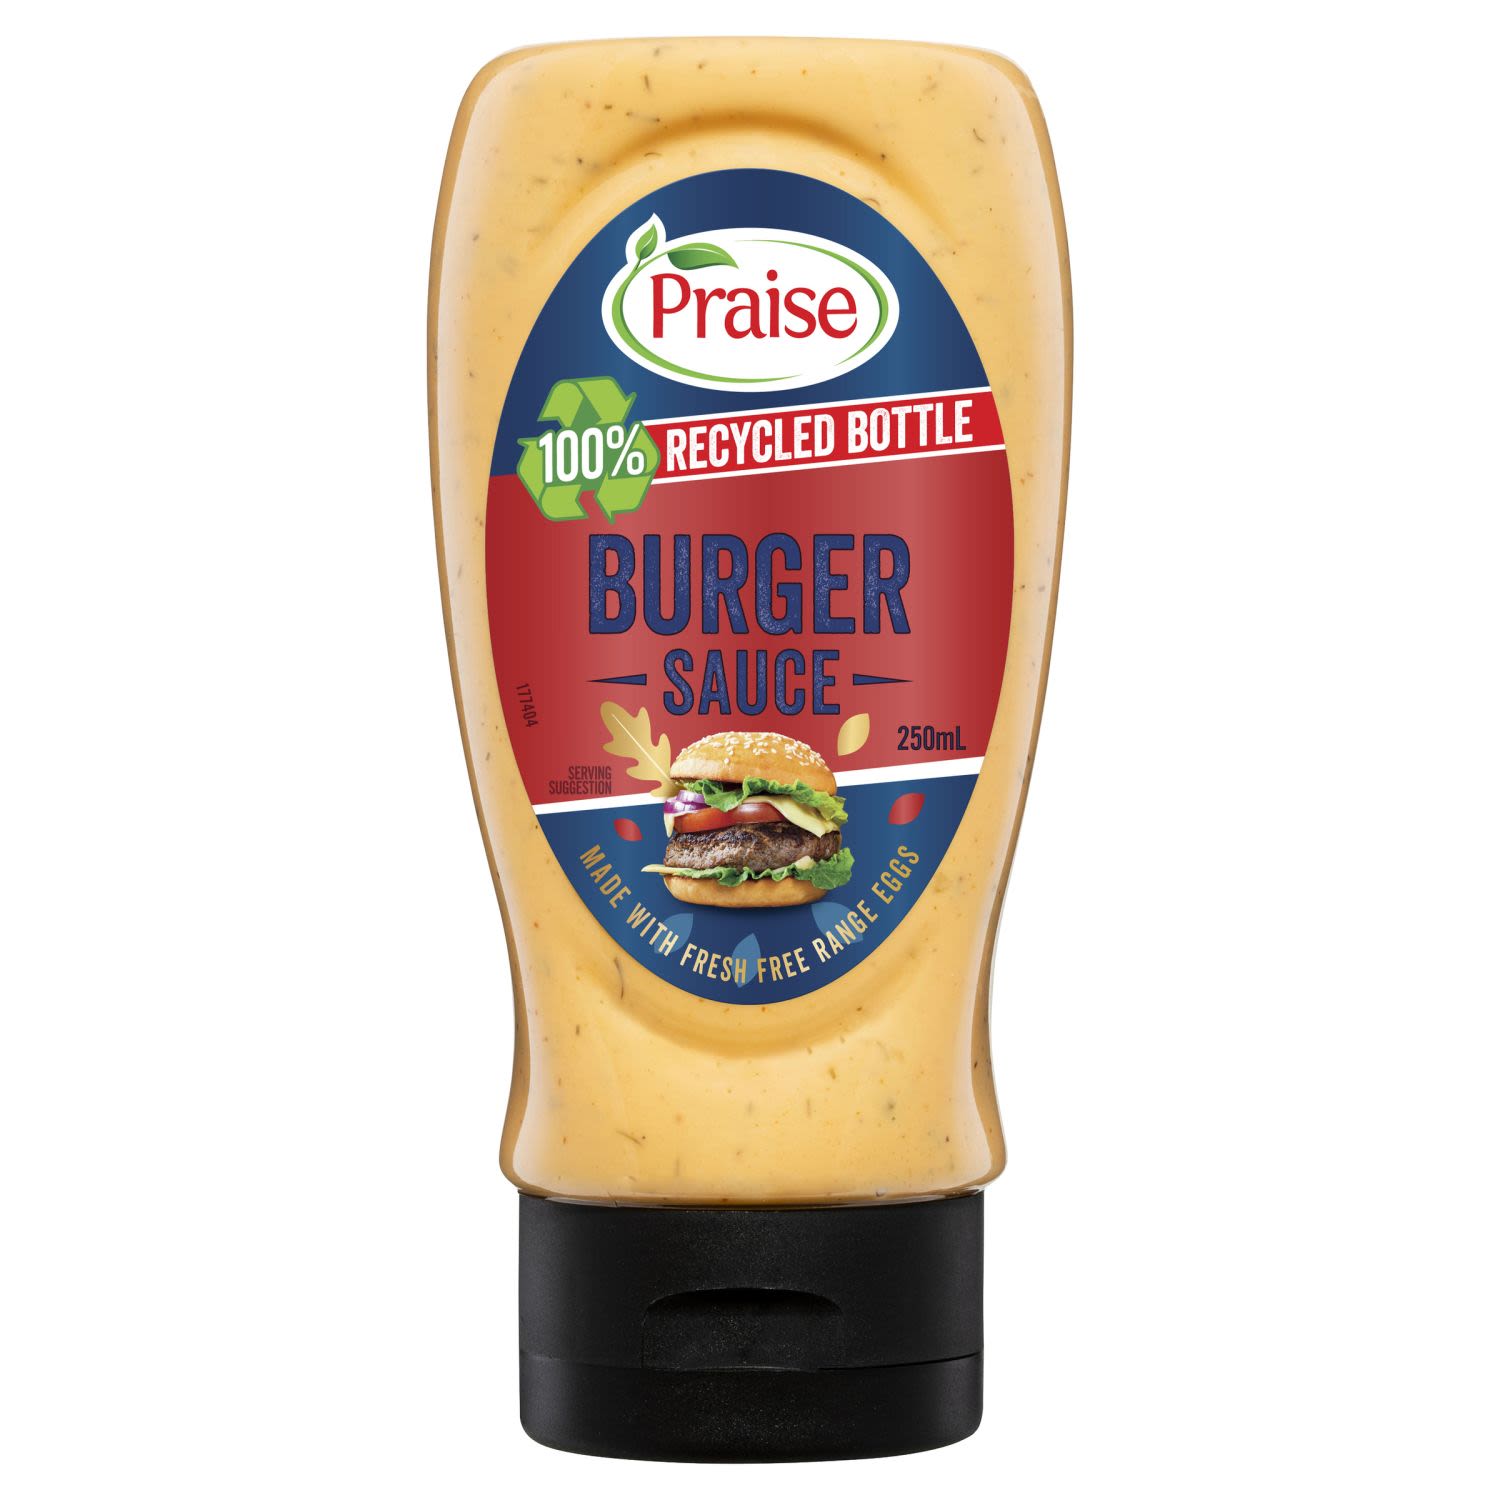 Make burger night even better with Praise Burger Sauce. Incredibly delicious, this sauce will give your burgers an irresistible taste, leaving you craving more! Best of all, it's not just fantastic on burgers - it's equally tasty on wraps and sandwiches too.<br /> <br /><br />Allergen may be present: Soy|Egg